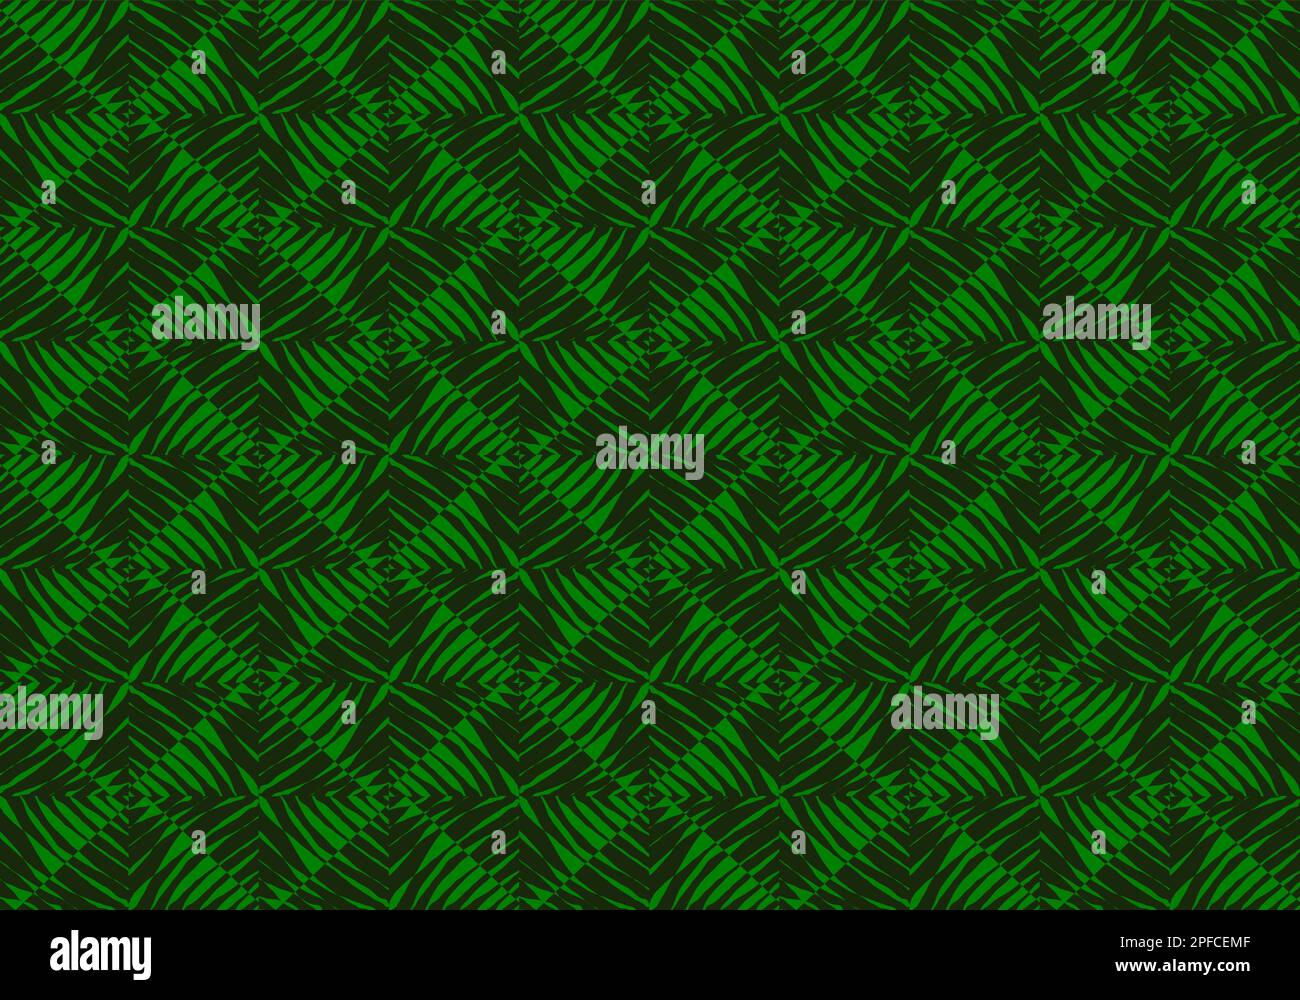 Green Leaf Pattern Mosaic Tiles Design Art for Backgrounds. Seamless Pattern. Mosaic. Geometry. Vector Illustration Graphic Design. Stock Vector